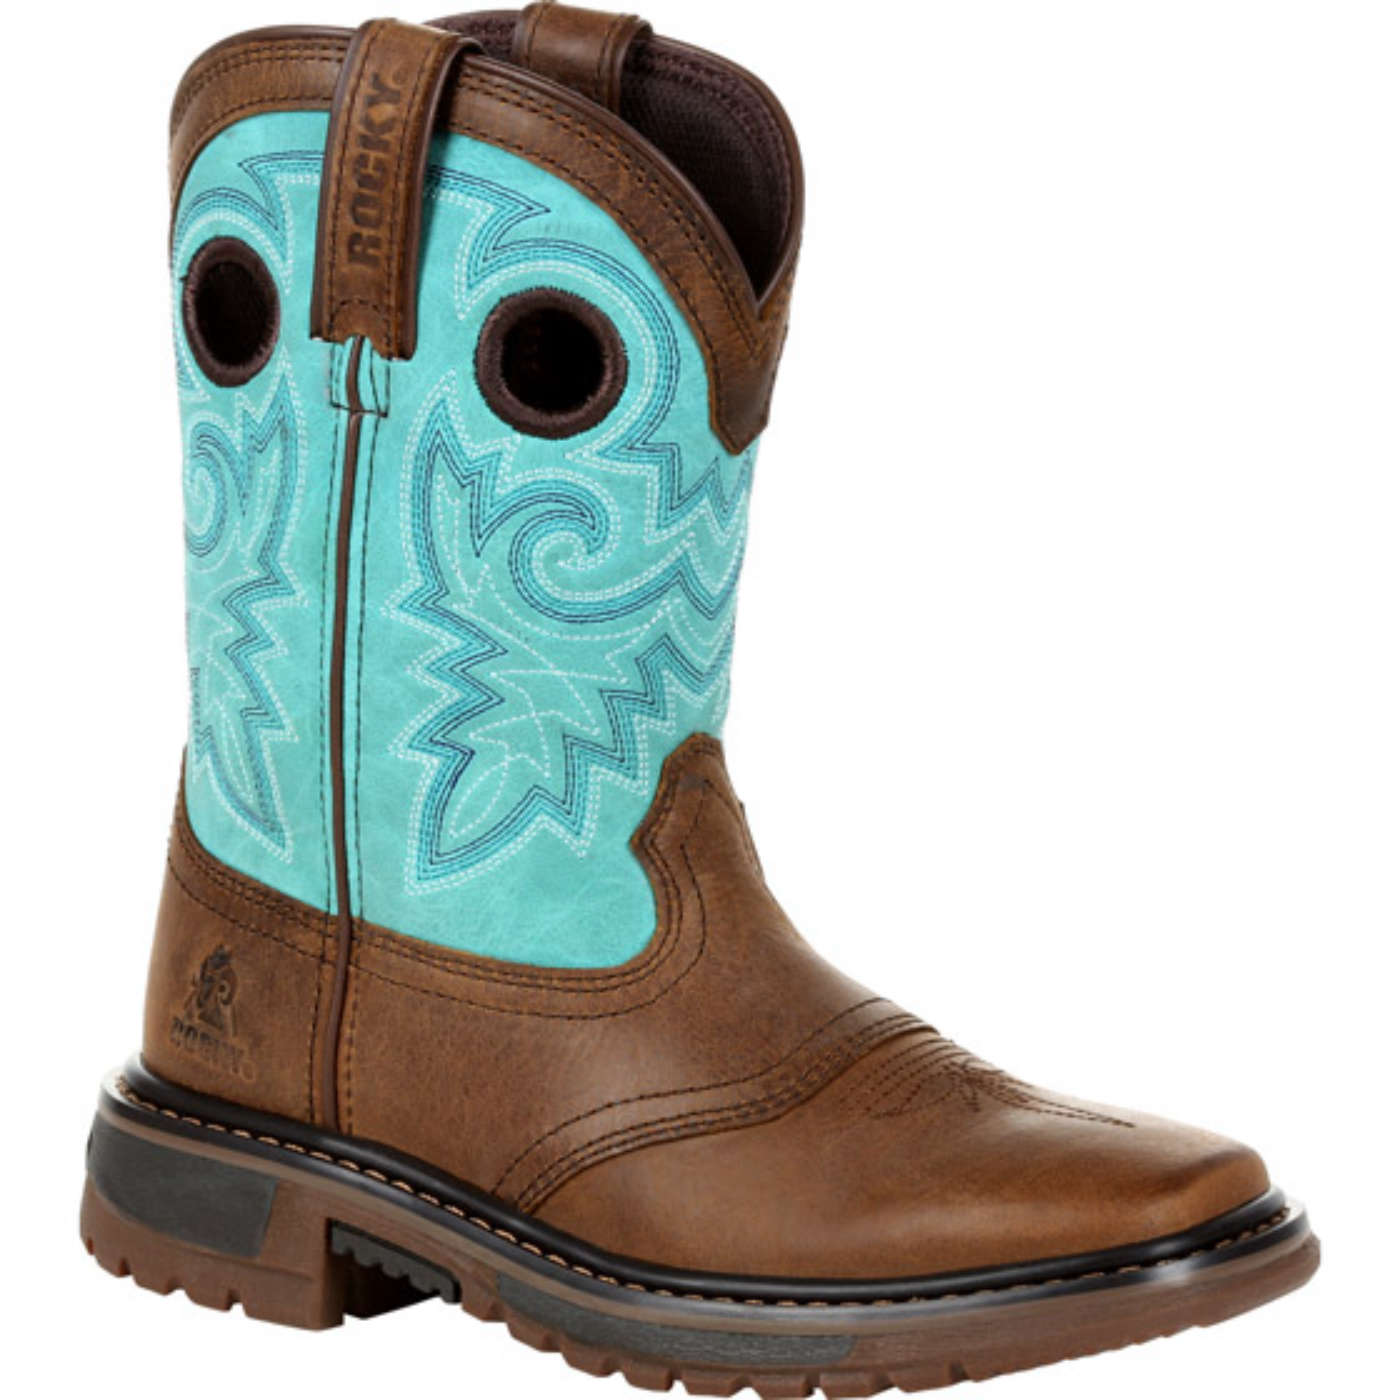 Rocky Kid's Original Ride FLX Western Boot Size 2.5(M) - image 1 of 7